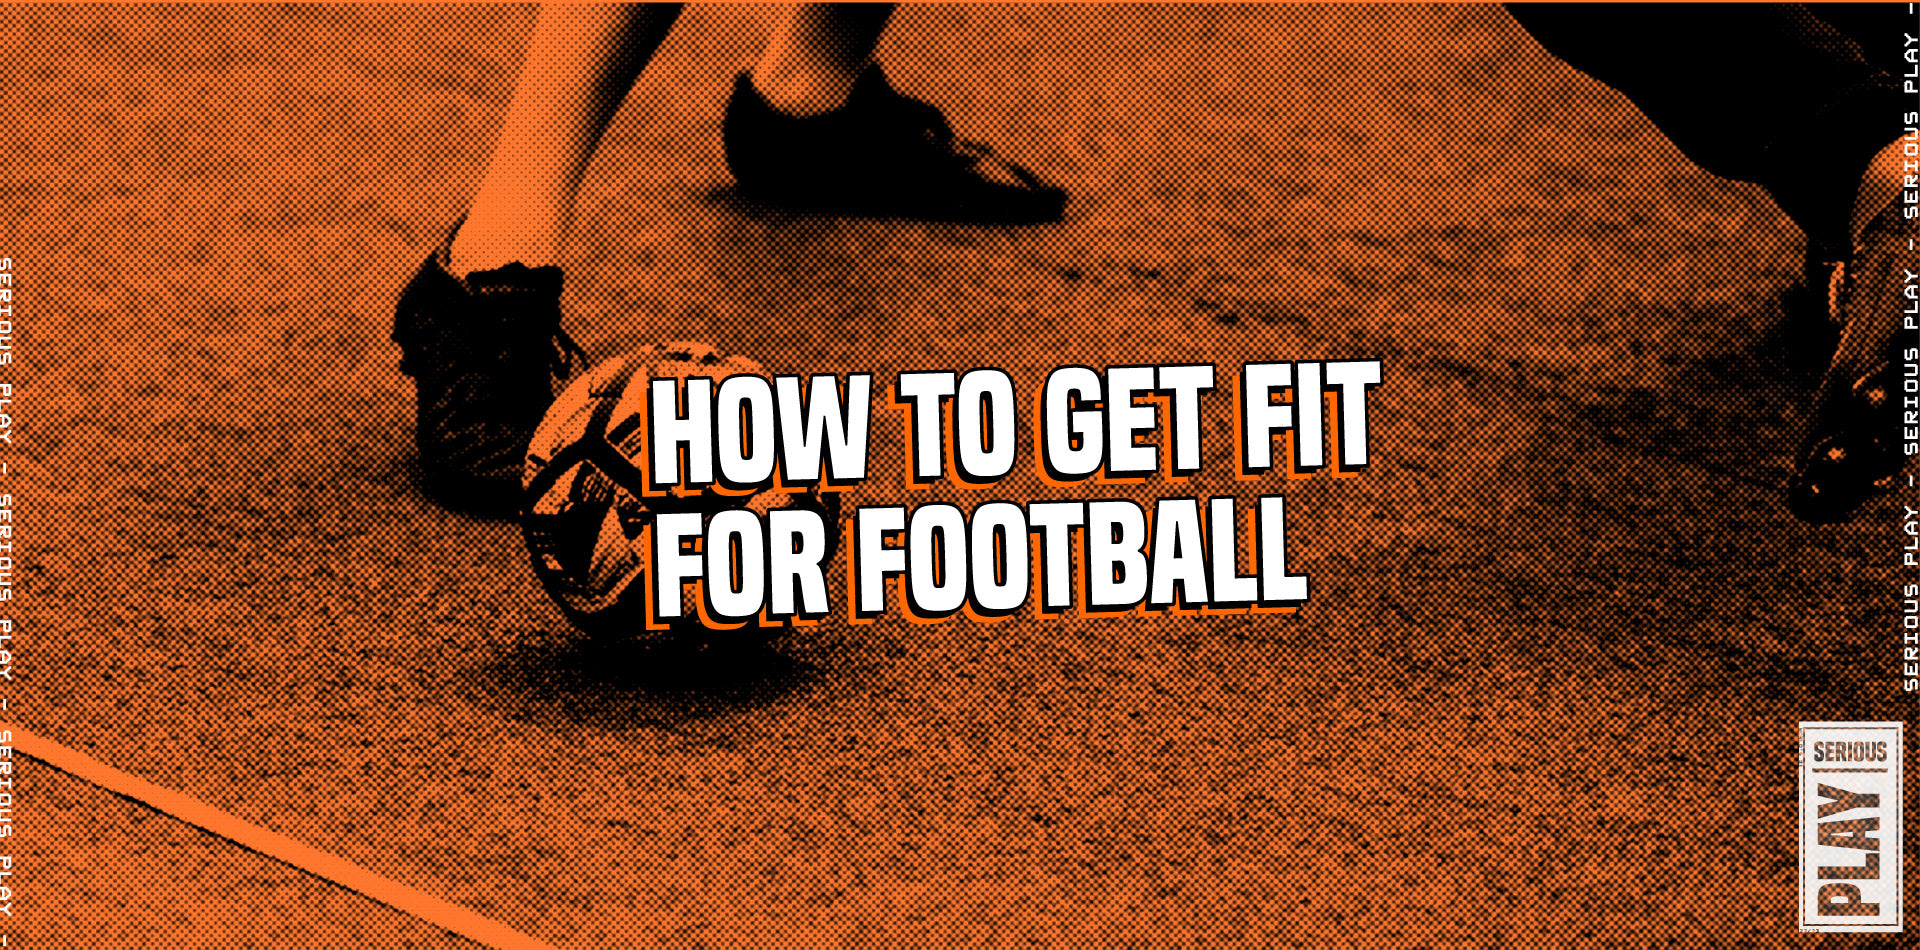 How to get fit for football